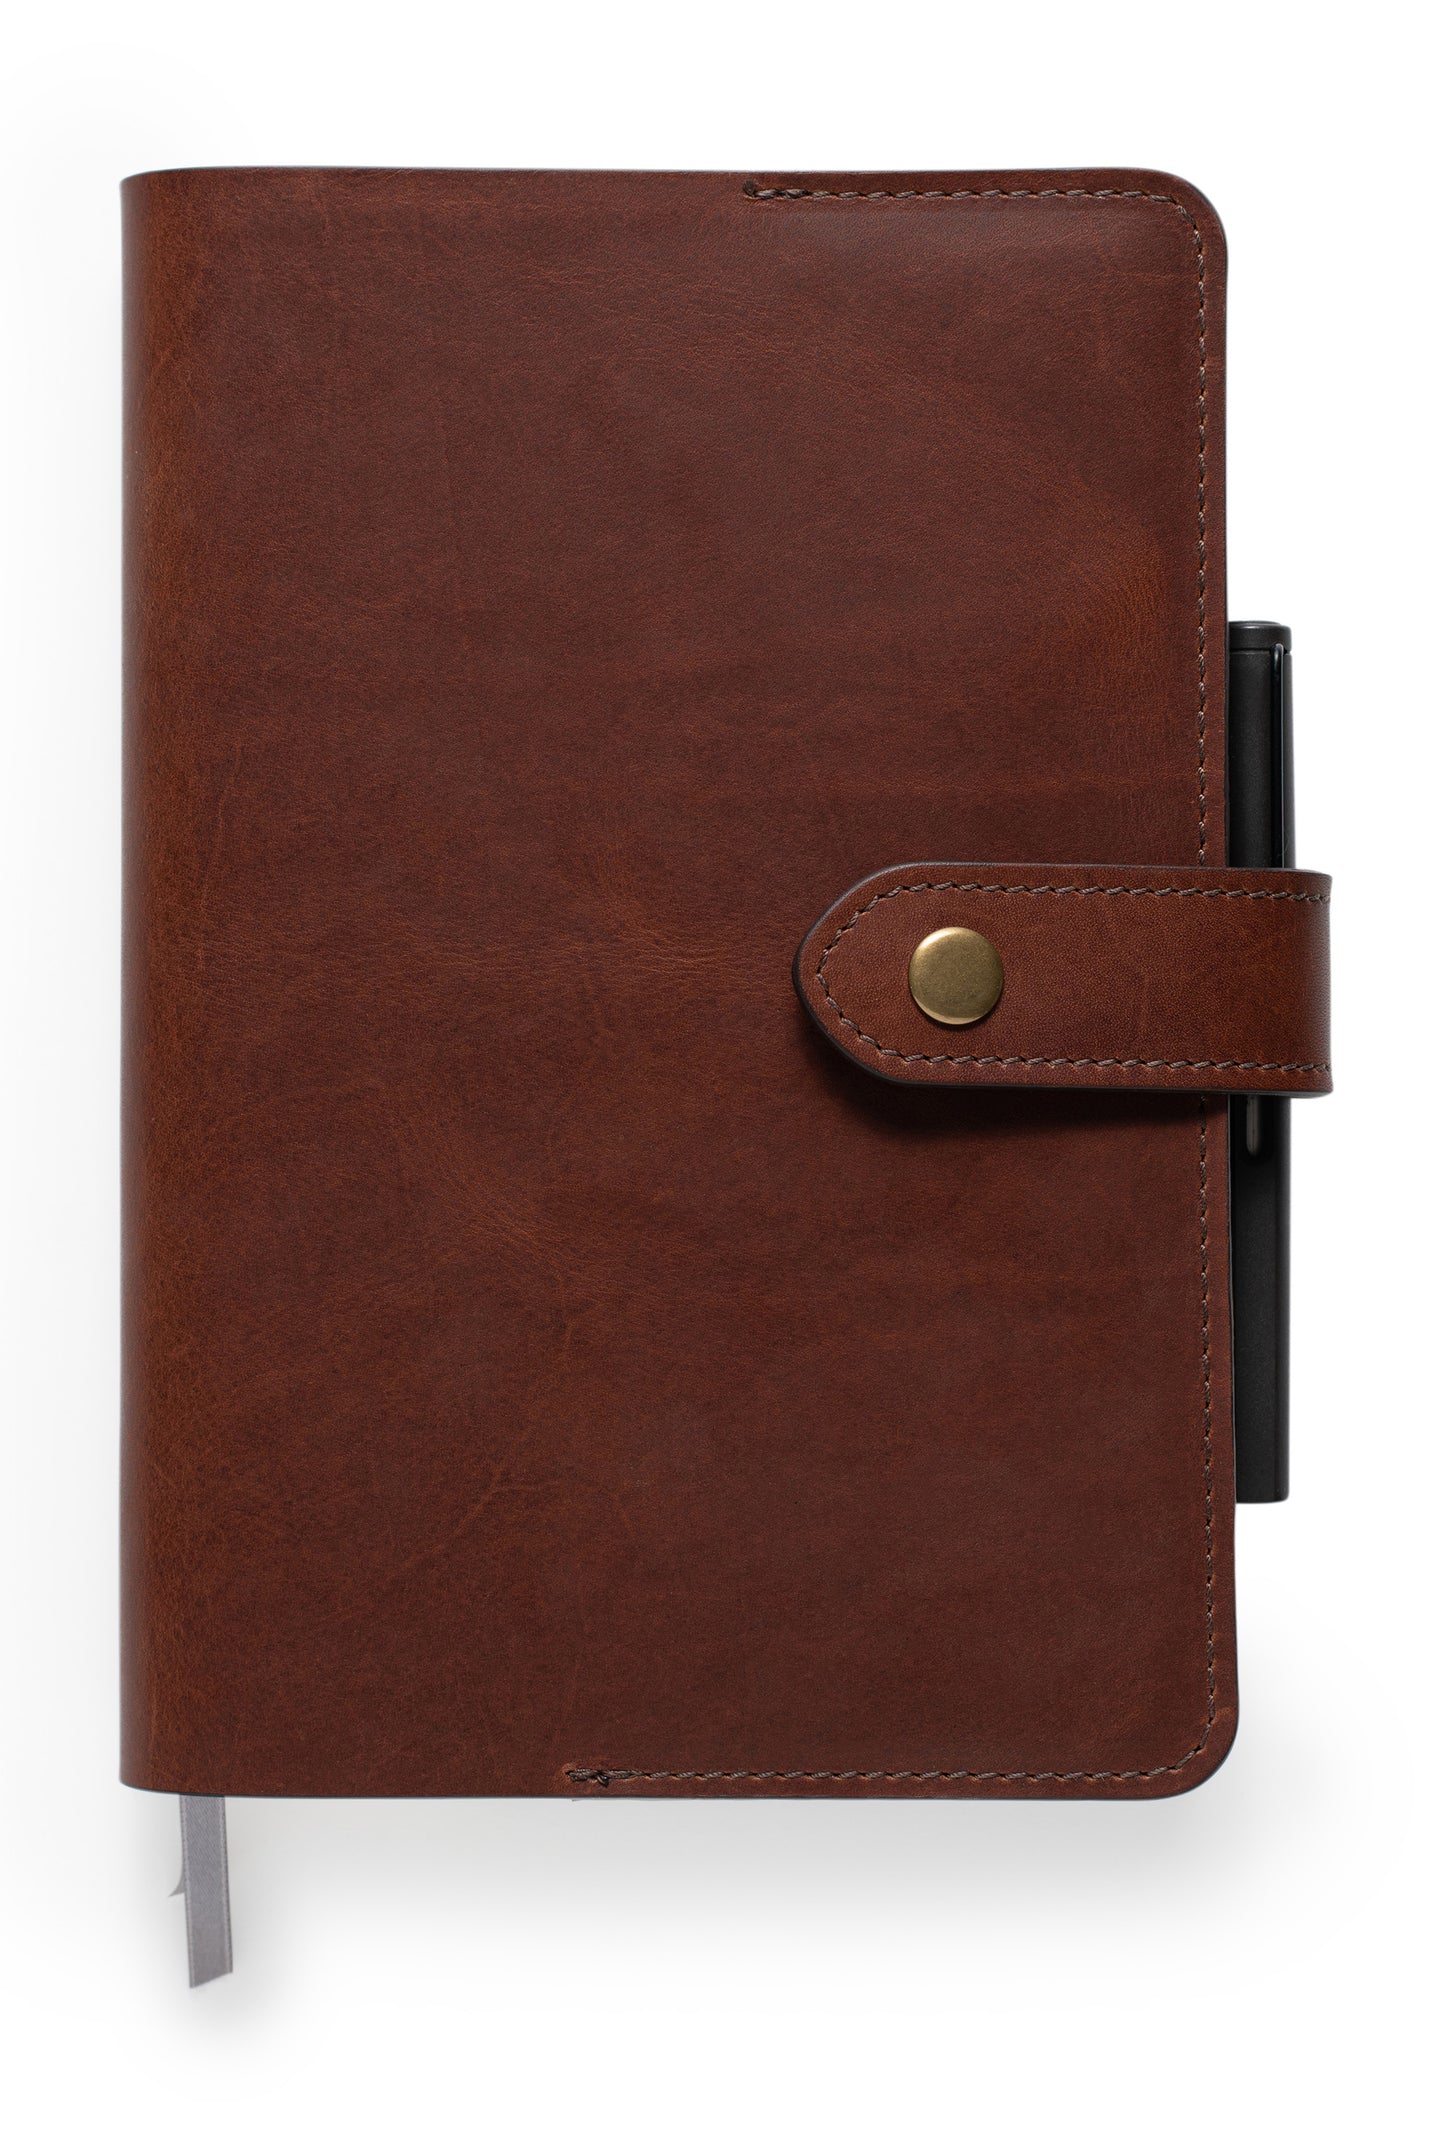 front of leather planner for full focus planner by Michael Hyatt, pictured in vintage brown full grain leather